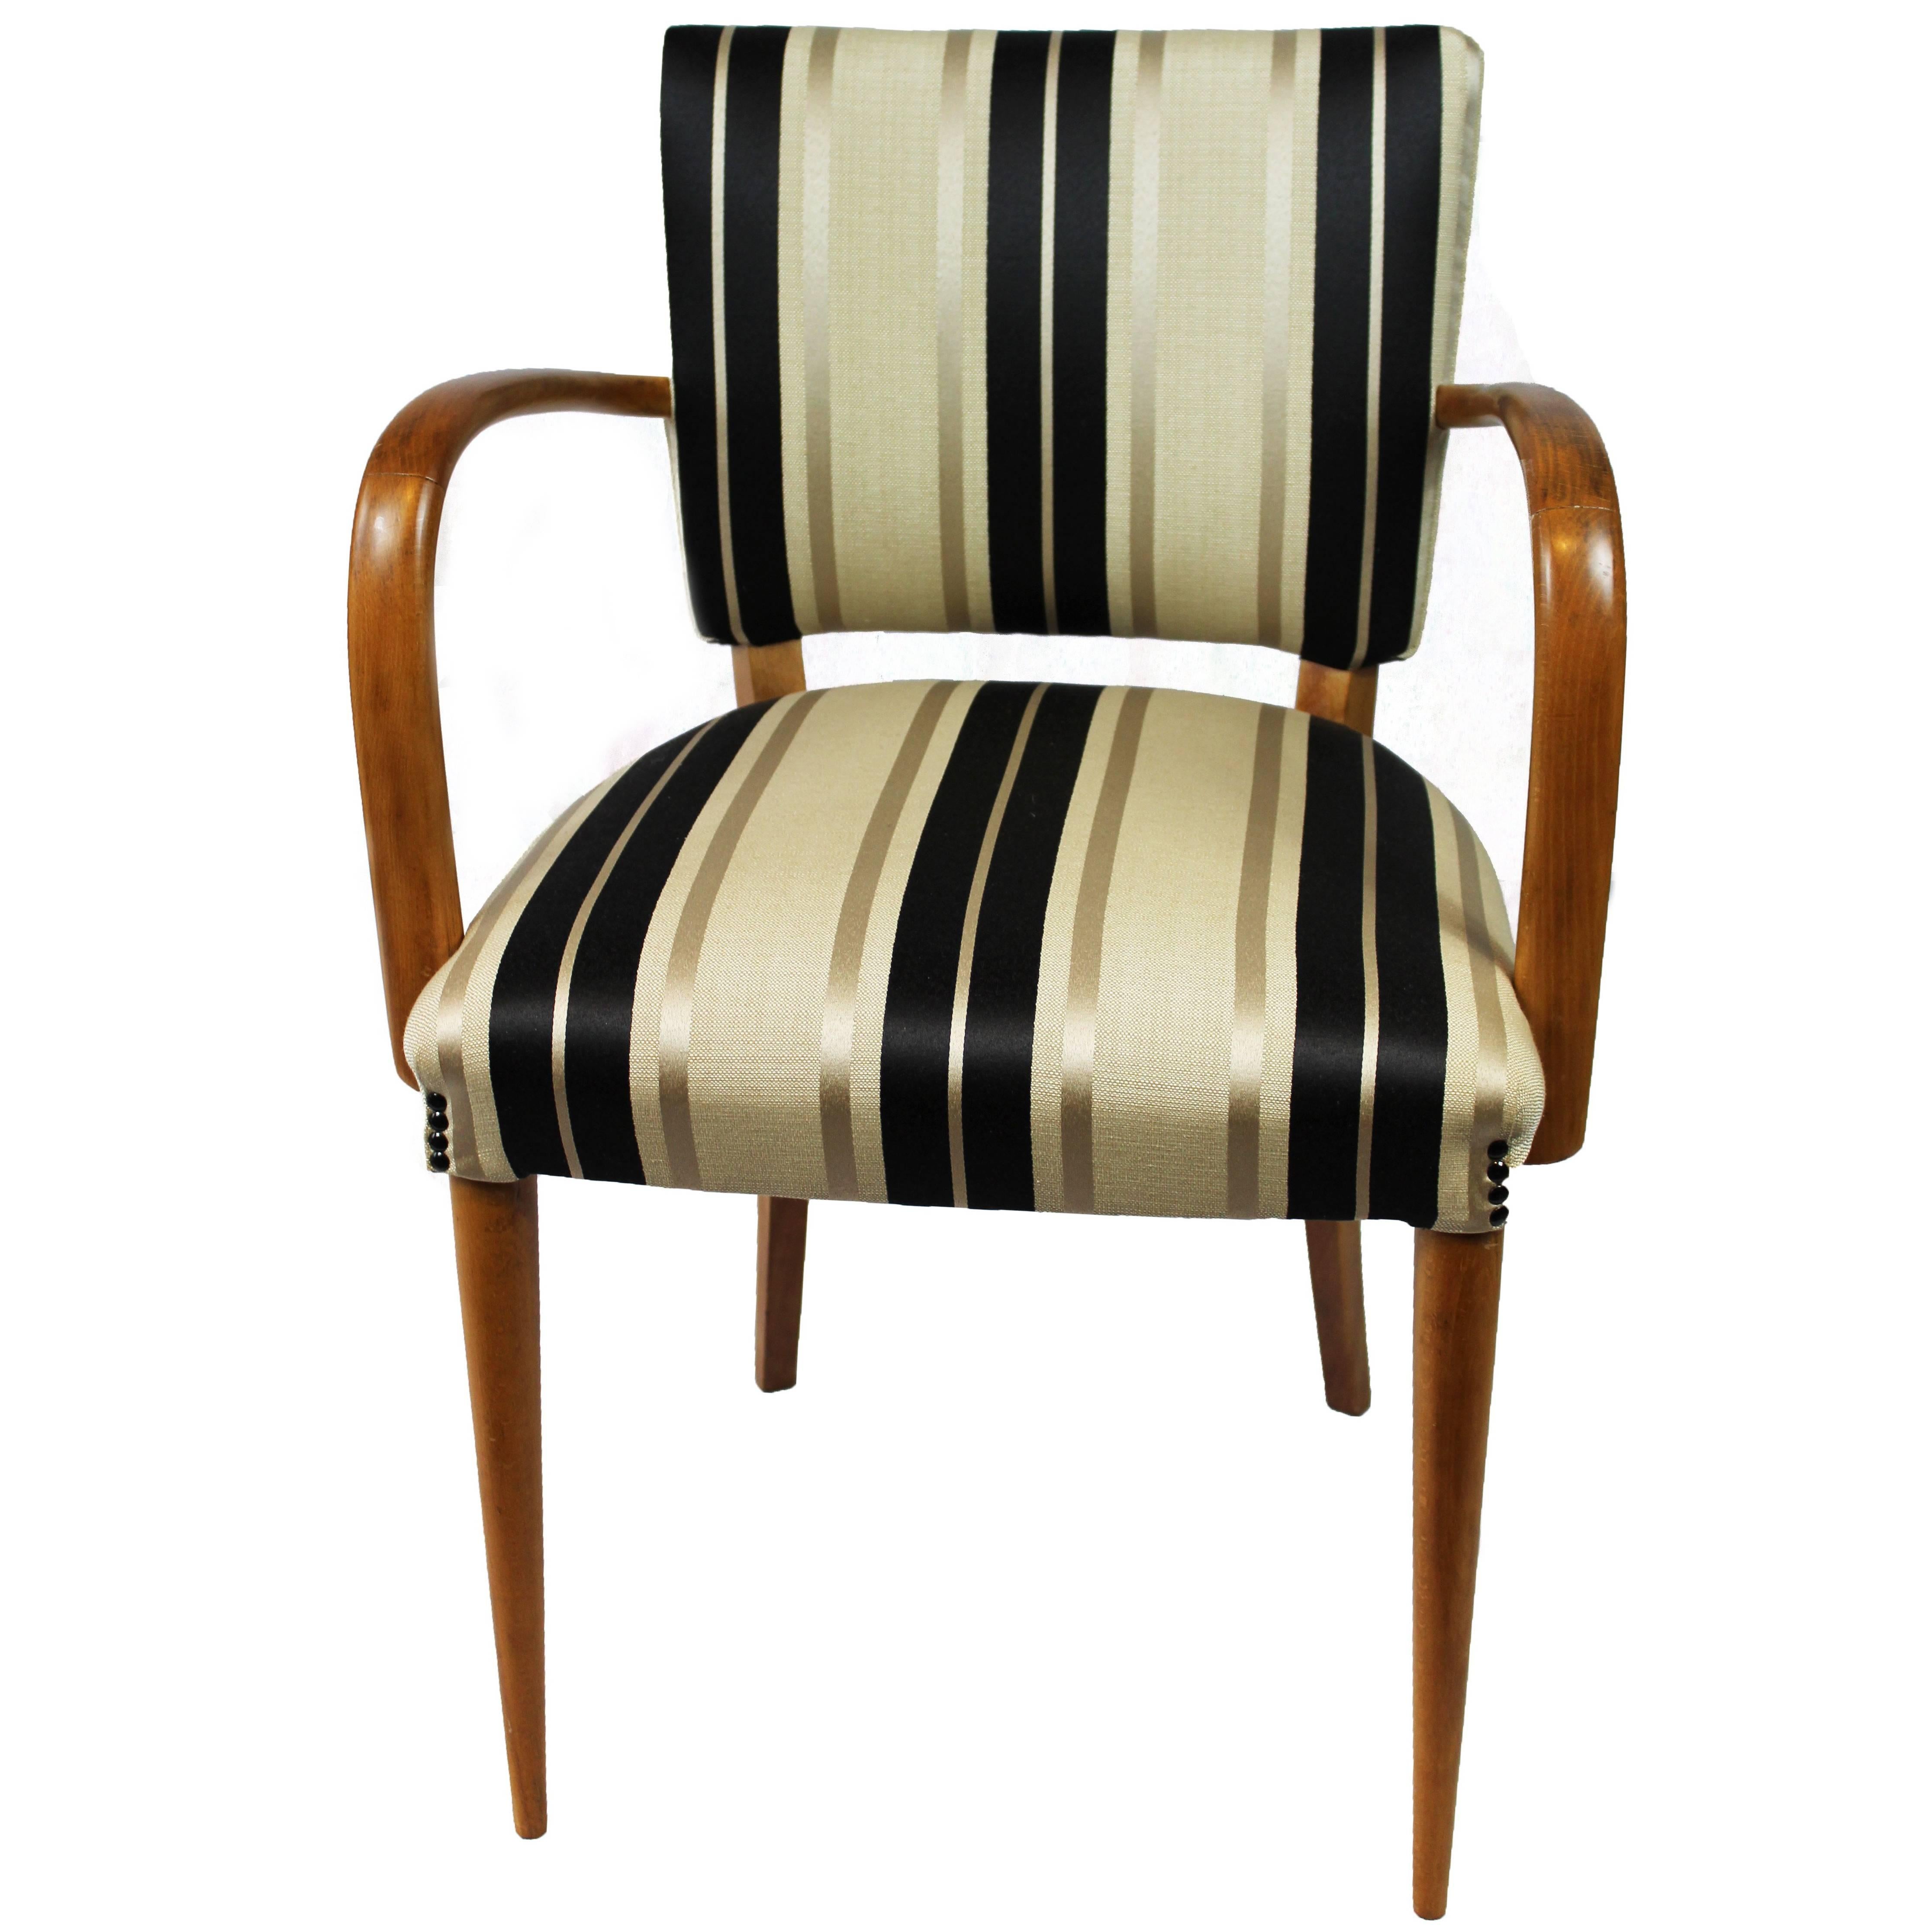 Olivewood Italian Desk Chair with Striped Jacquard Cushion, 1940s